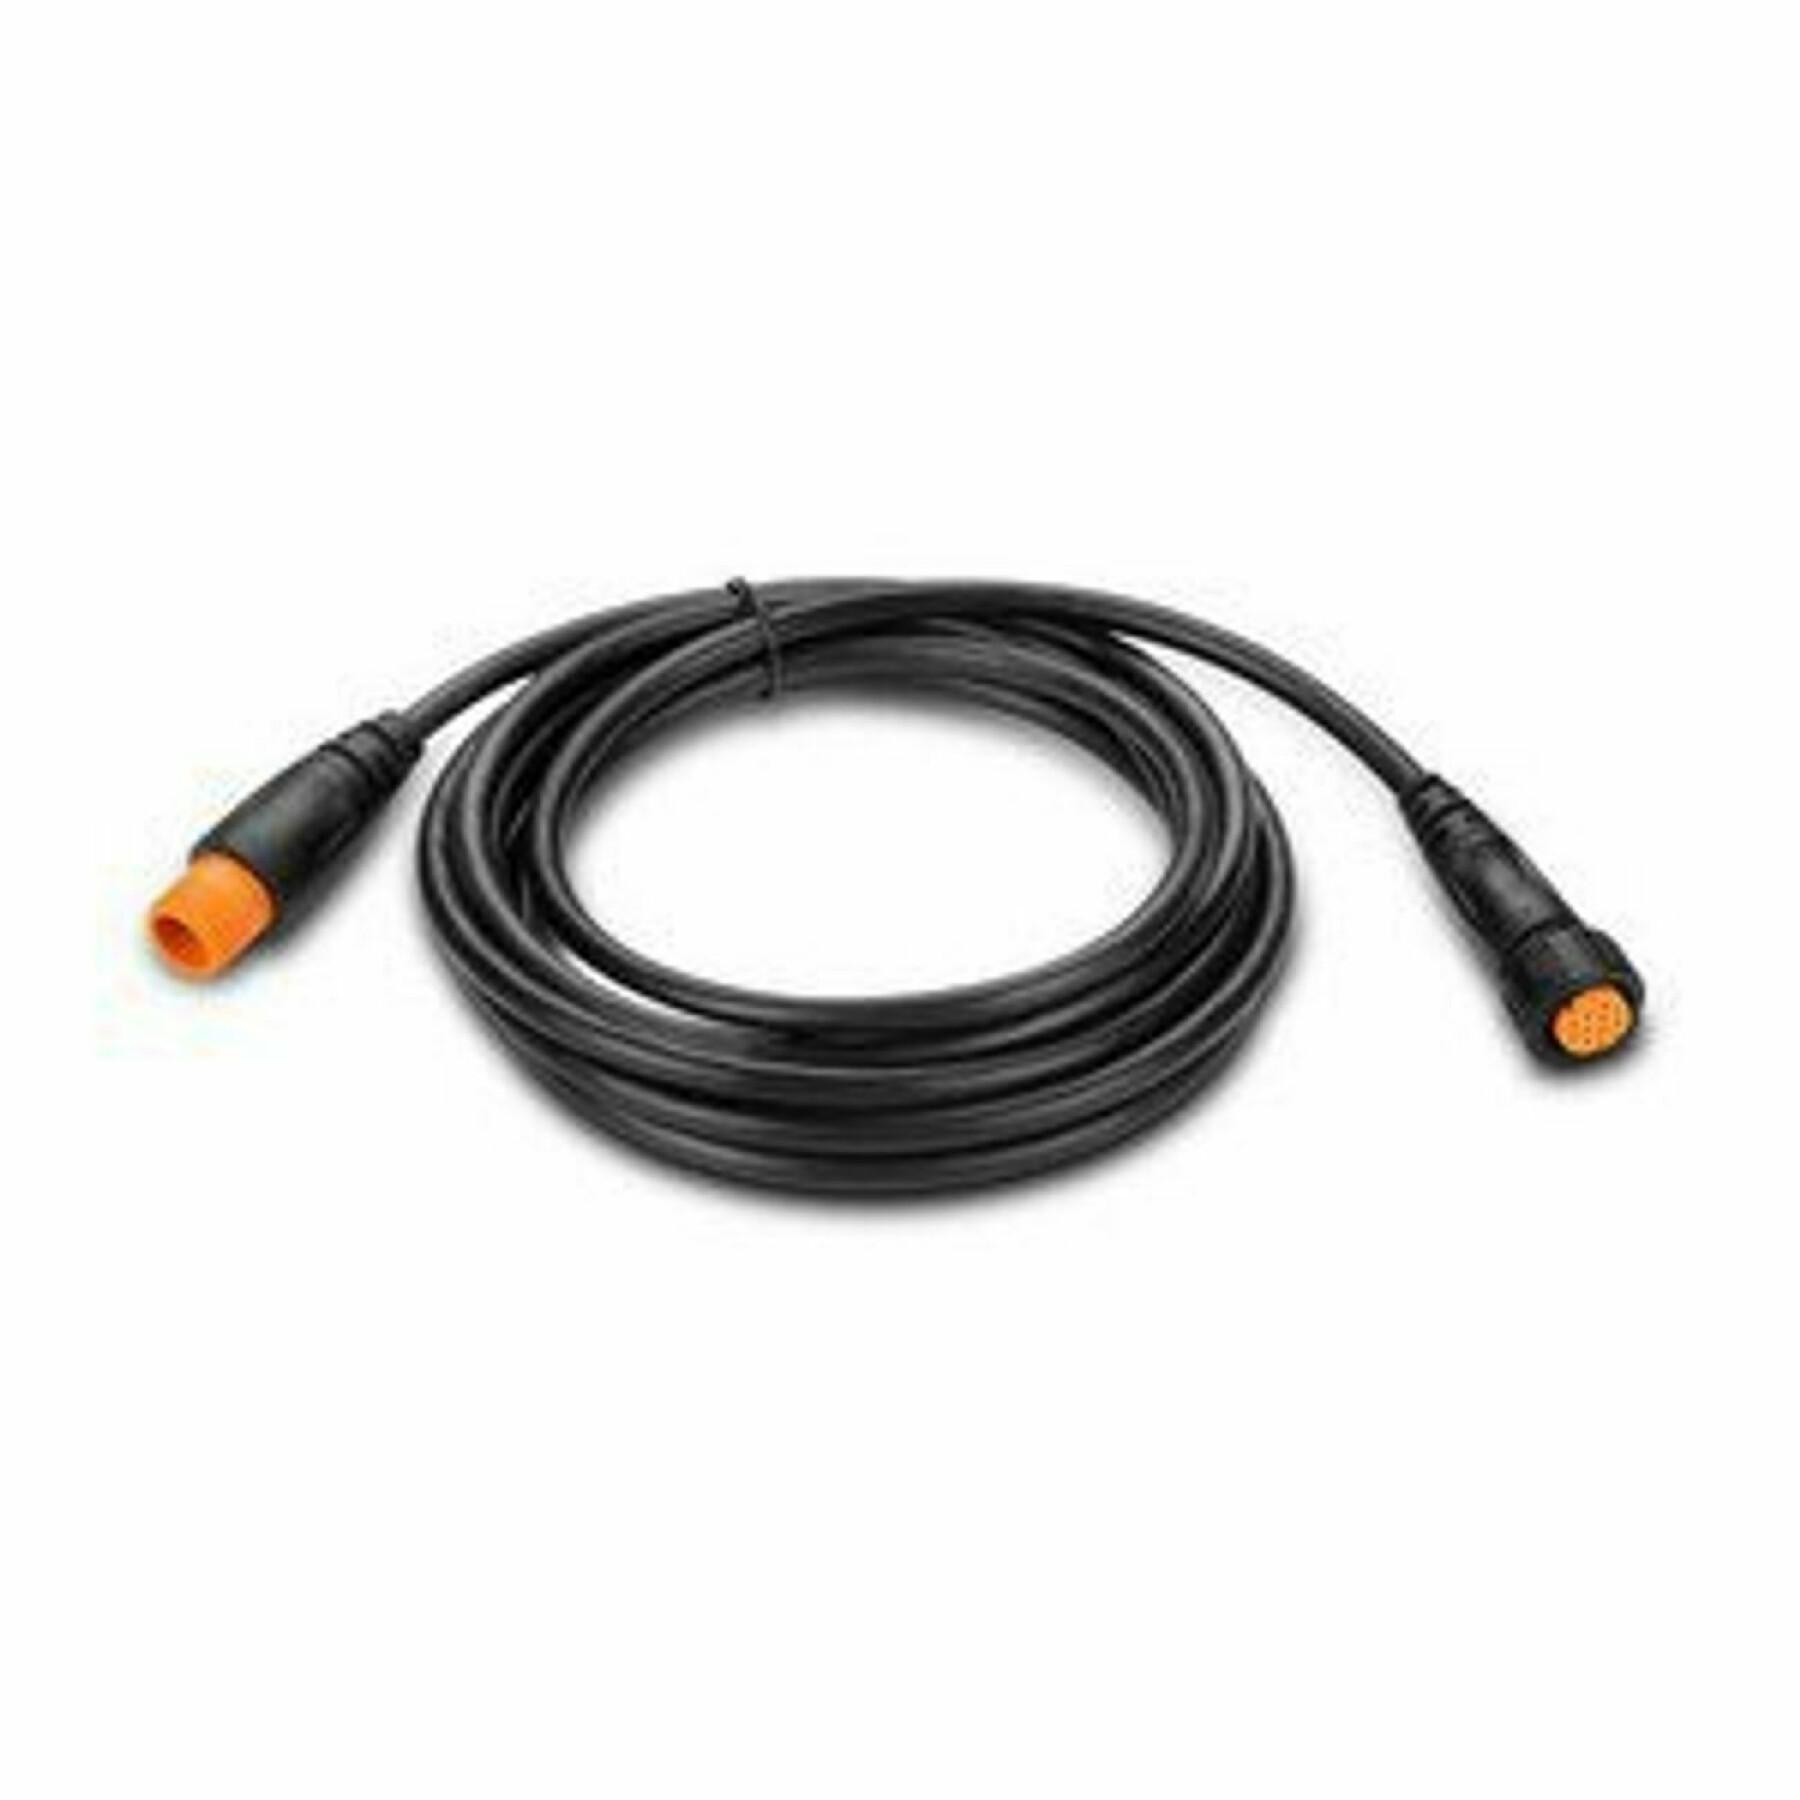 Cable Garmin extension cable for 12-pin scanning transducers 10 feet